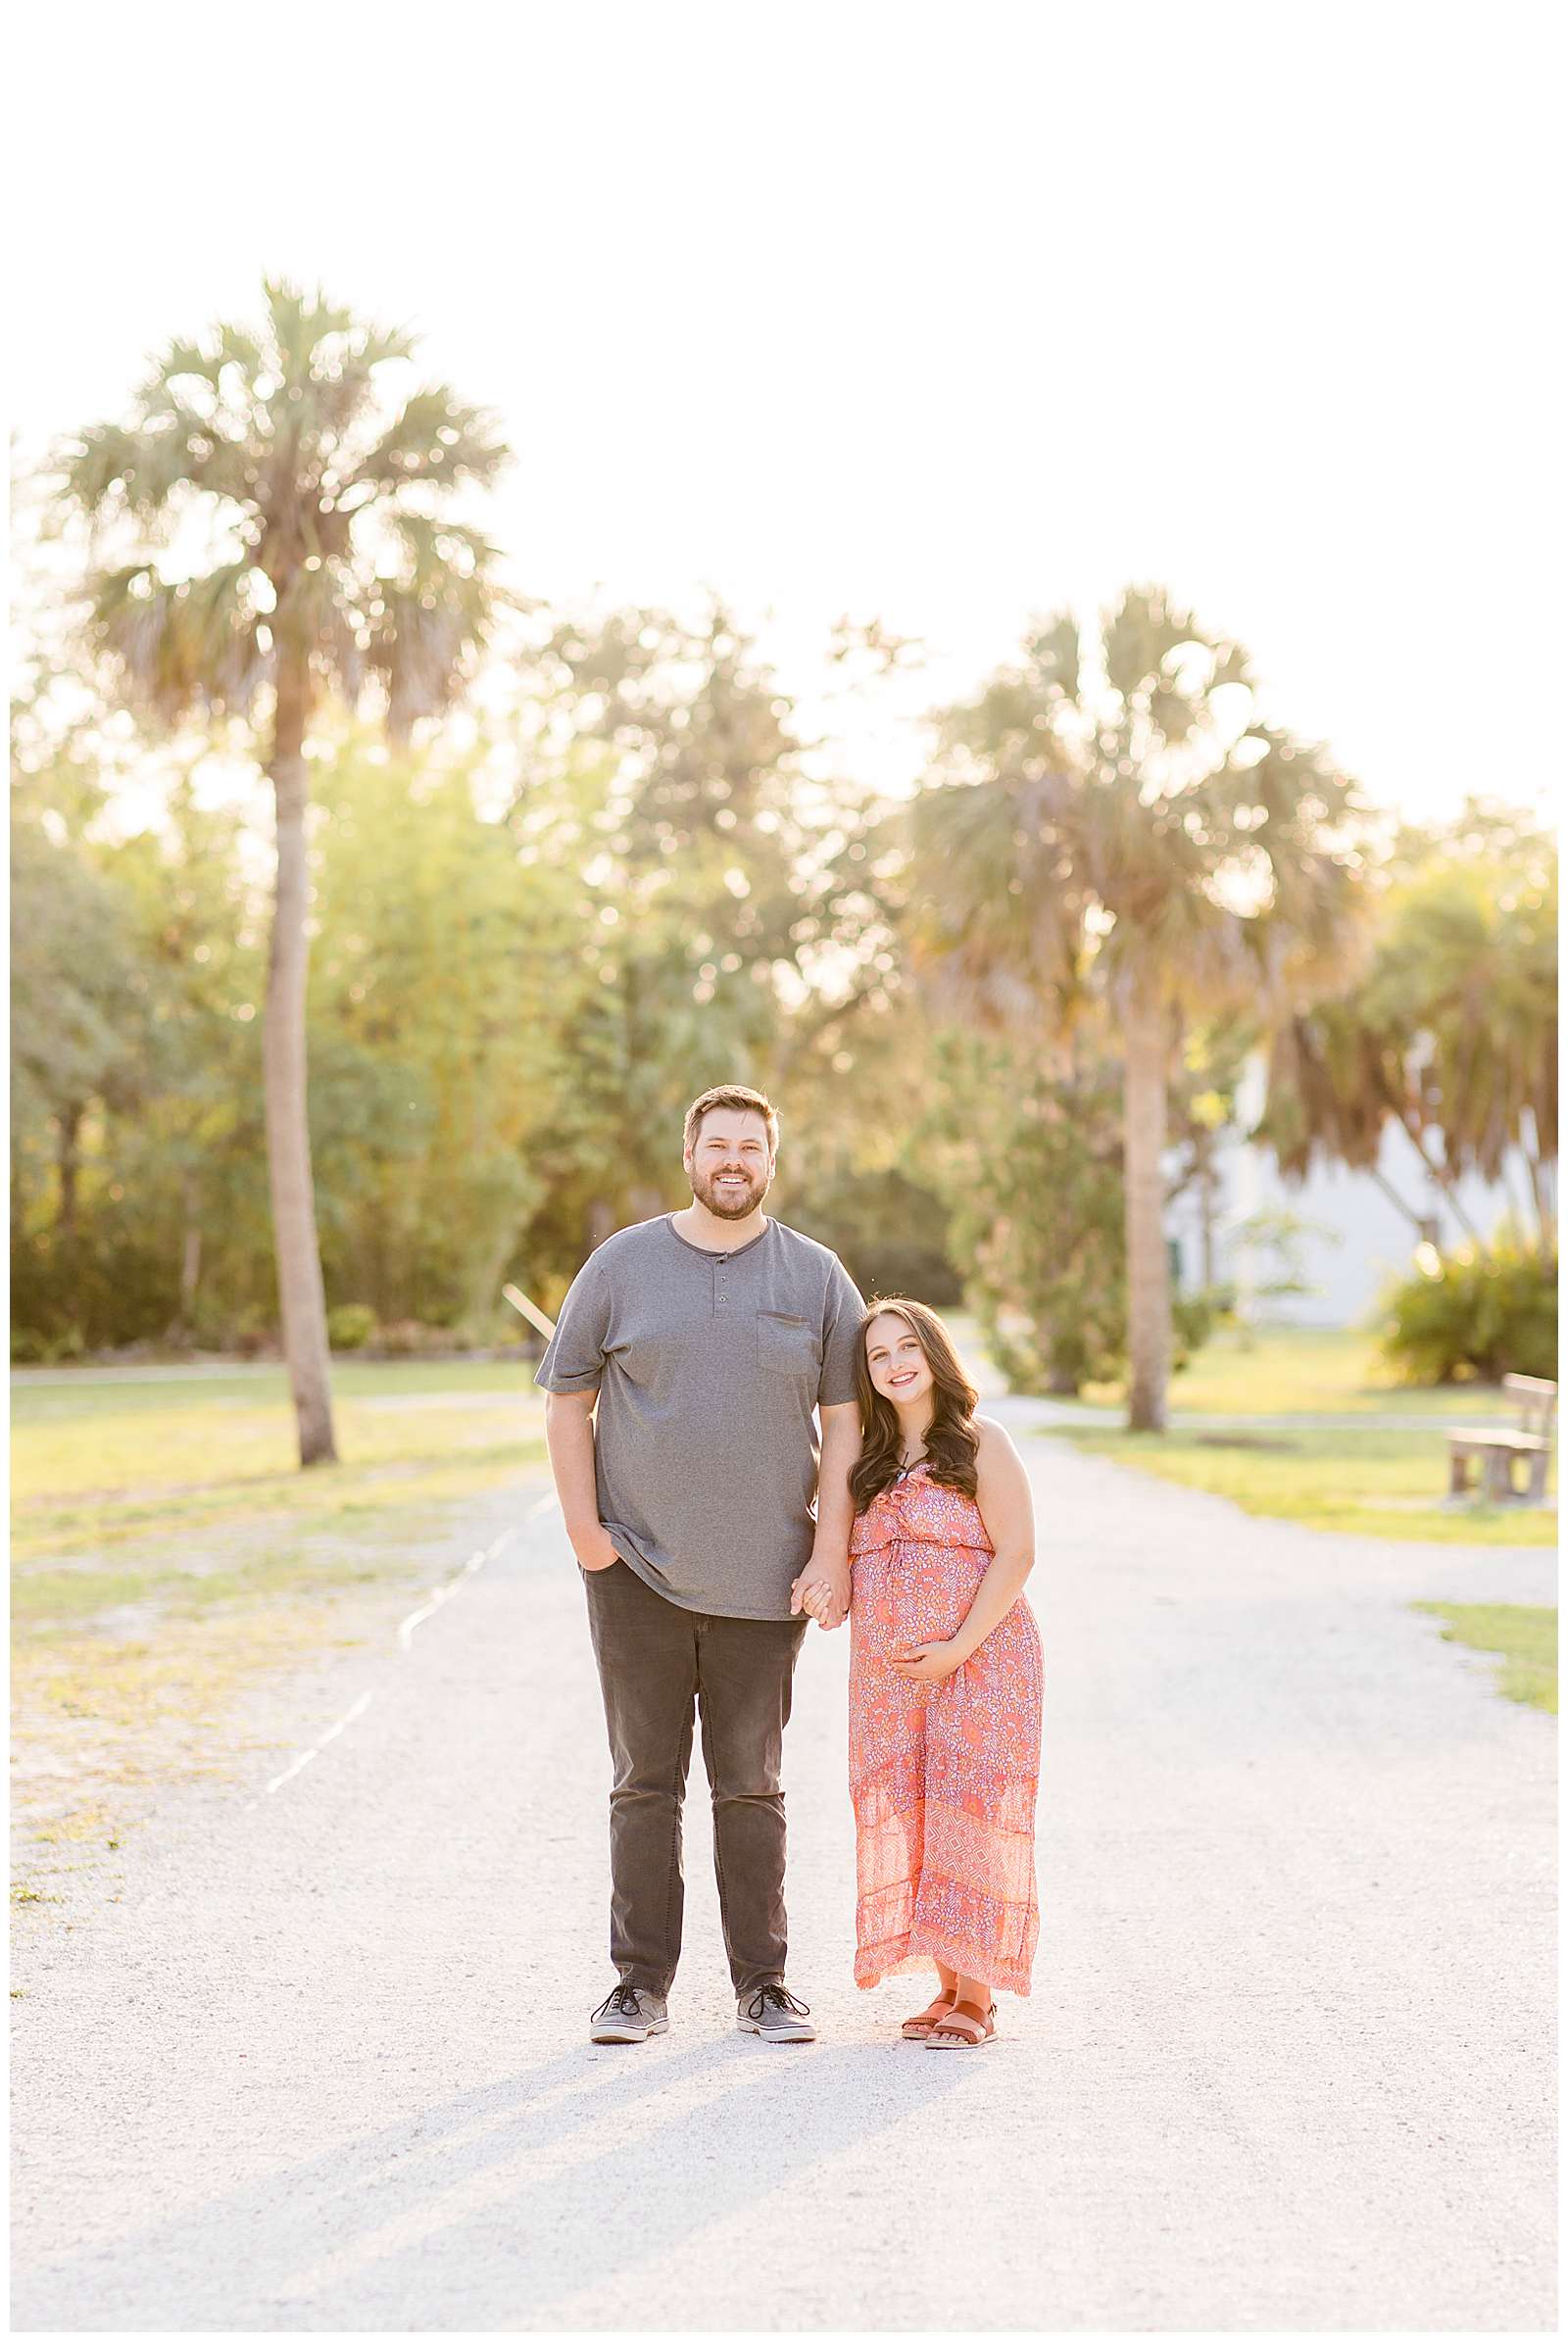 Expecting couple stands on pathway holding hands as they smile at the camera of Rebecca Rice Photography for her Behind the Lens Membership!  Click to see more of this BIG height difference couple on the blog today!
-rebeccaricephoto.com